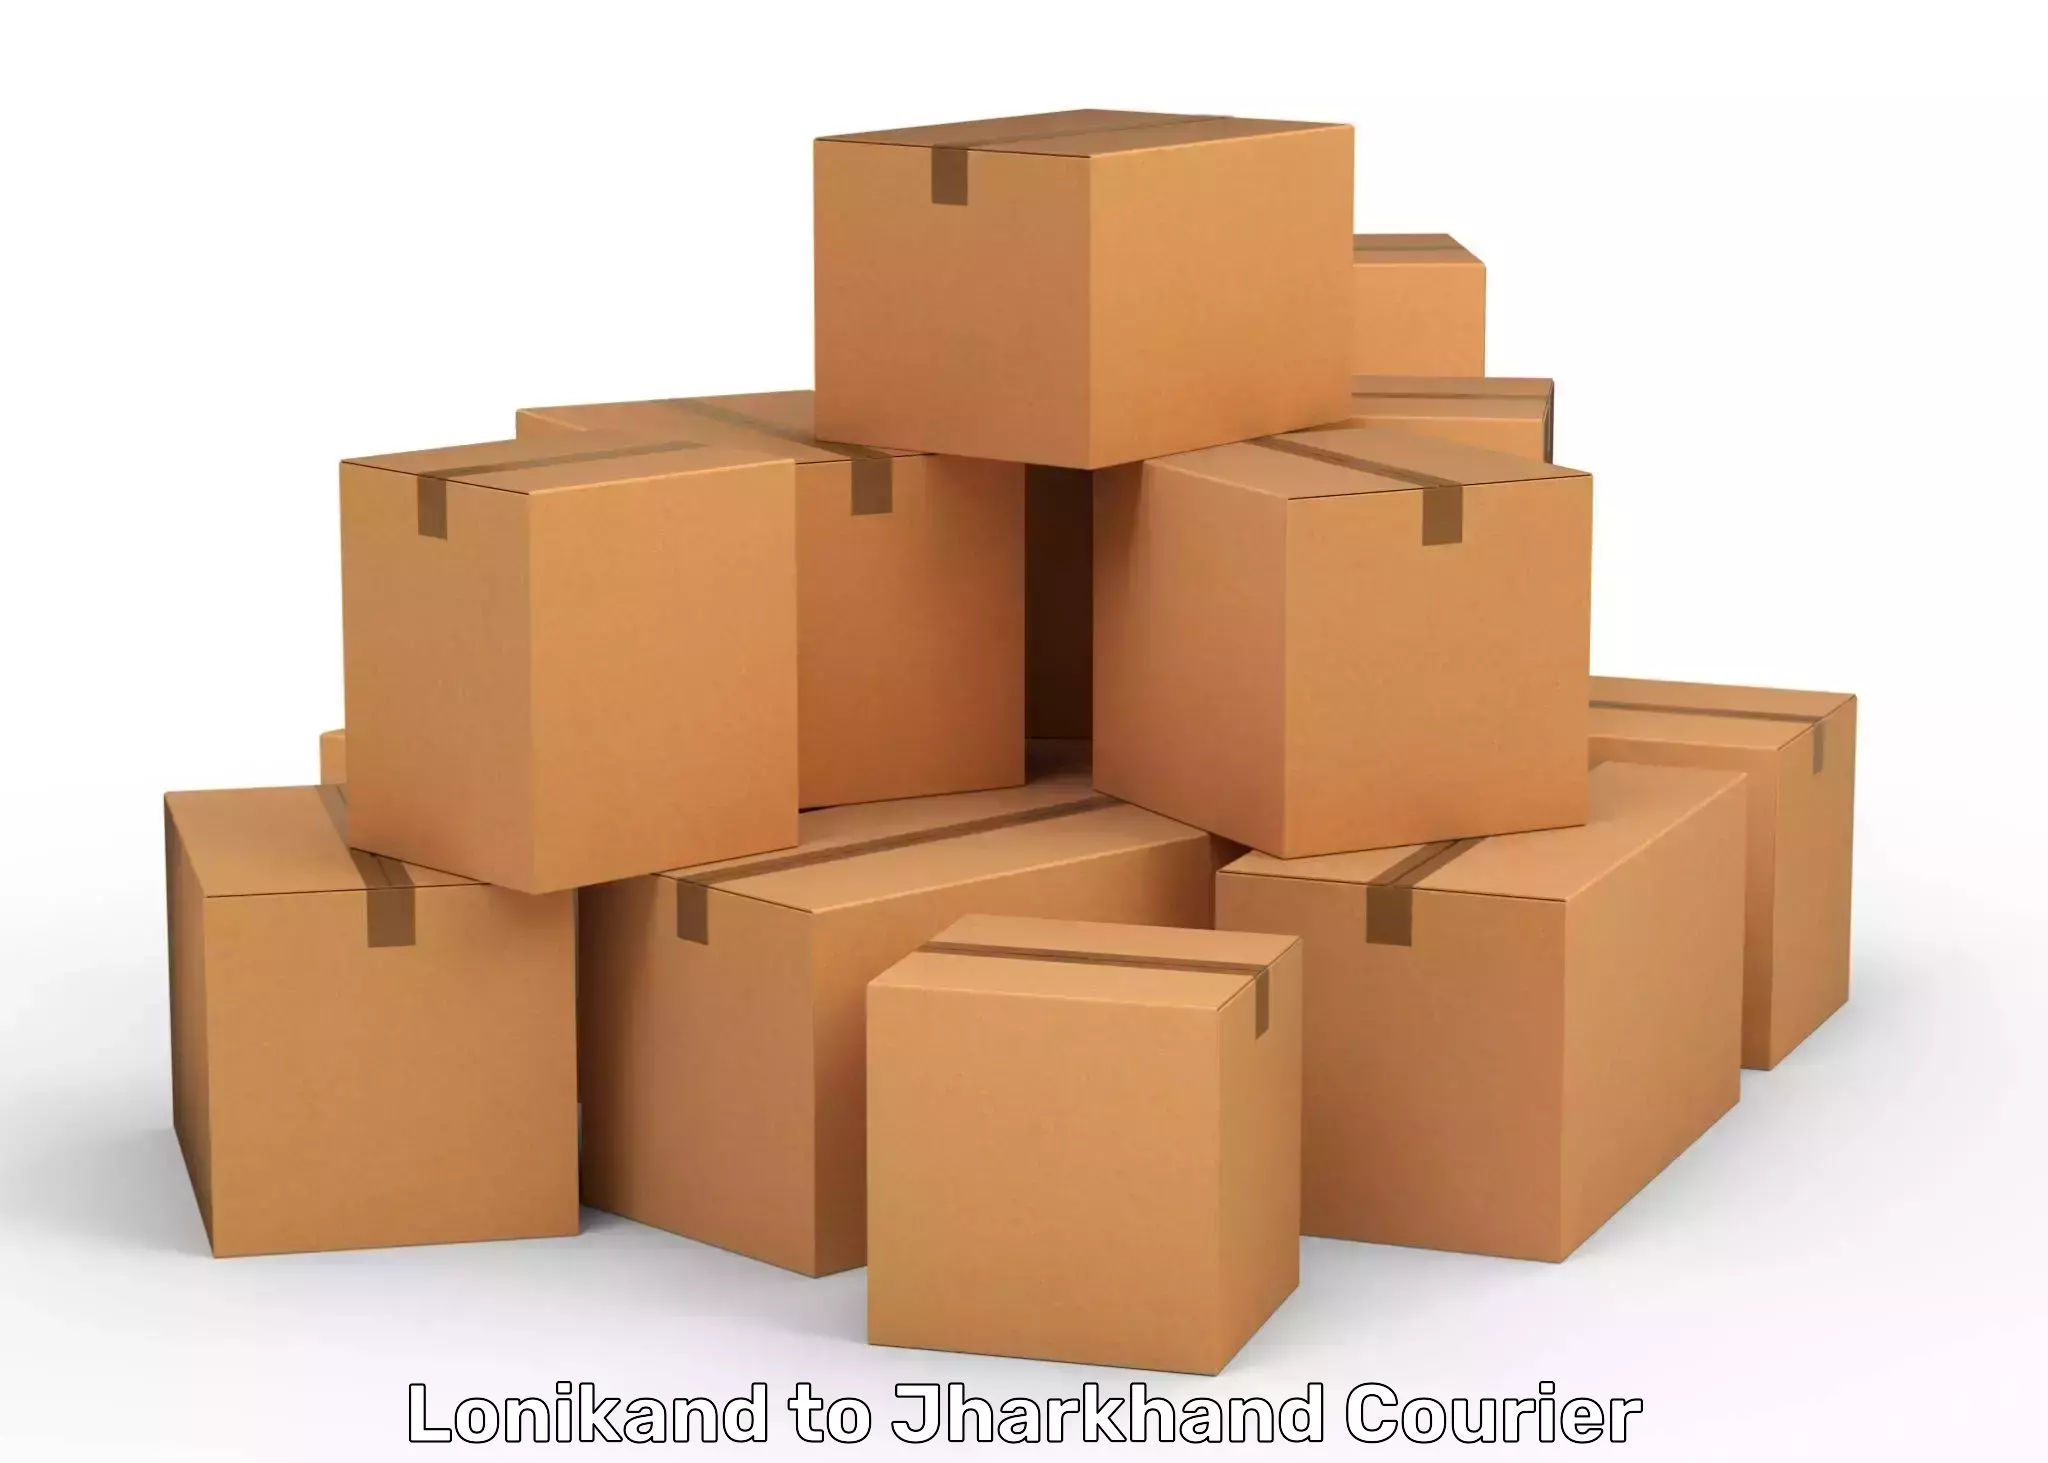 Efficient order fulfillment Lonikand to Jamshedpur